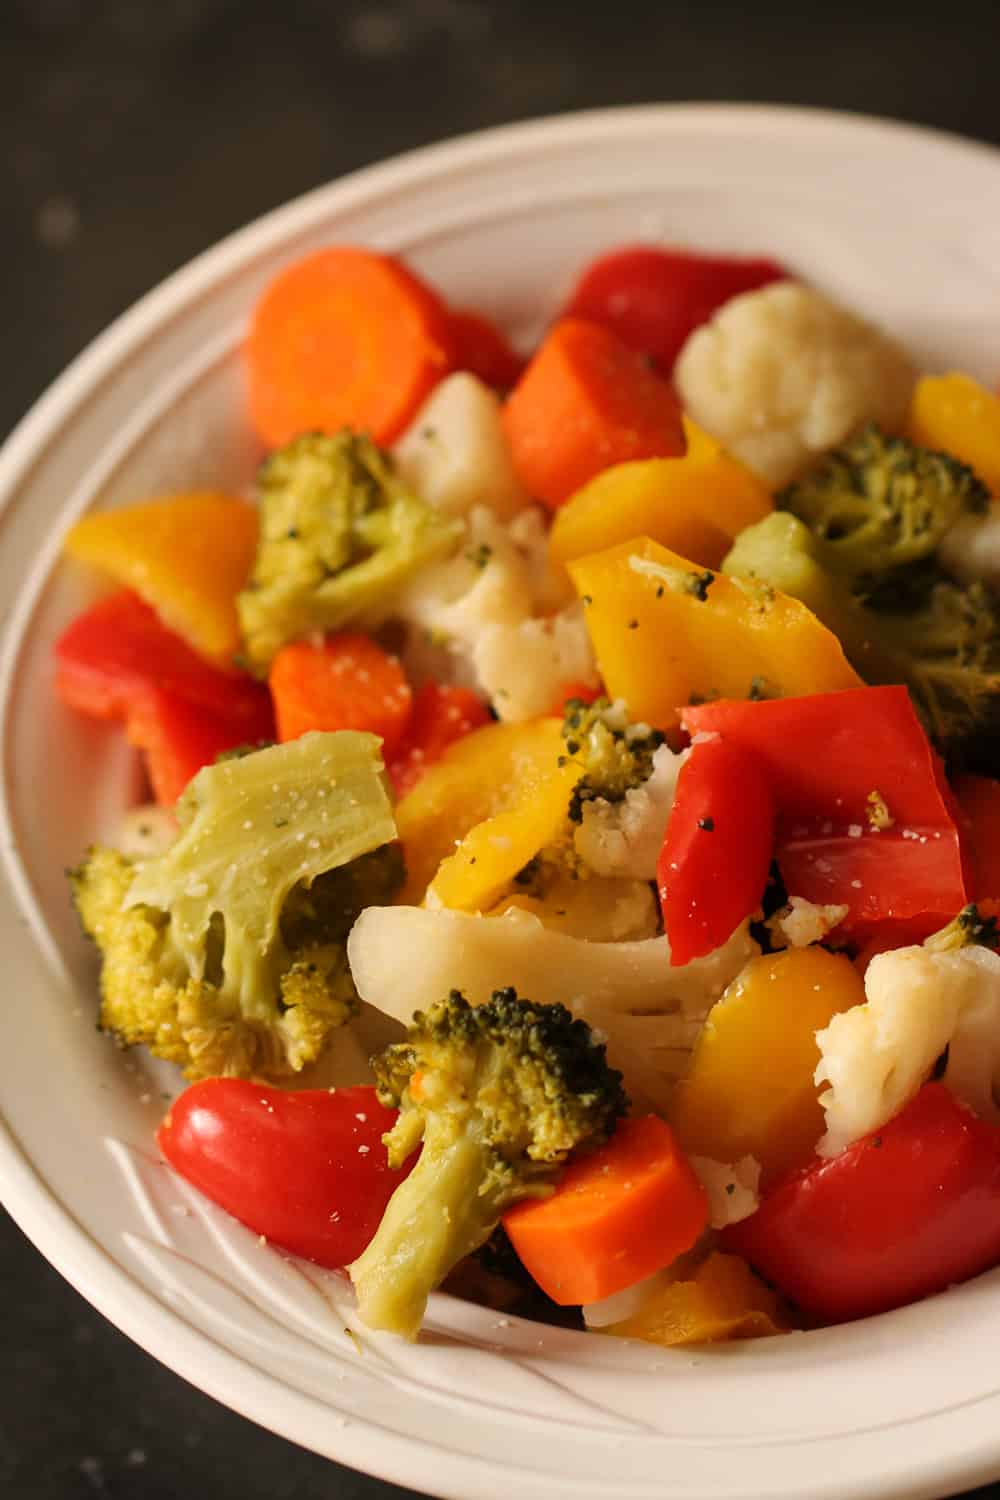 https://www.sixsistersstuff.com/wp-content/uploads/2020/04/Instant-Pot-Perfectly-Steamed-Vegetables-in-bowl-for-six-sisters-stuff.jpg